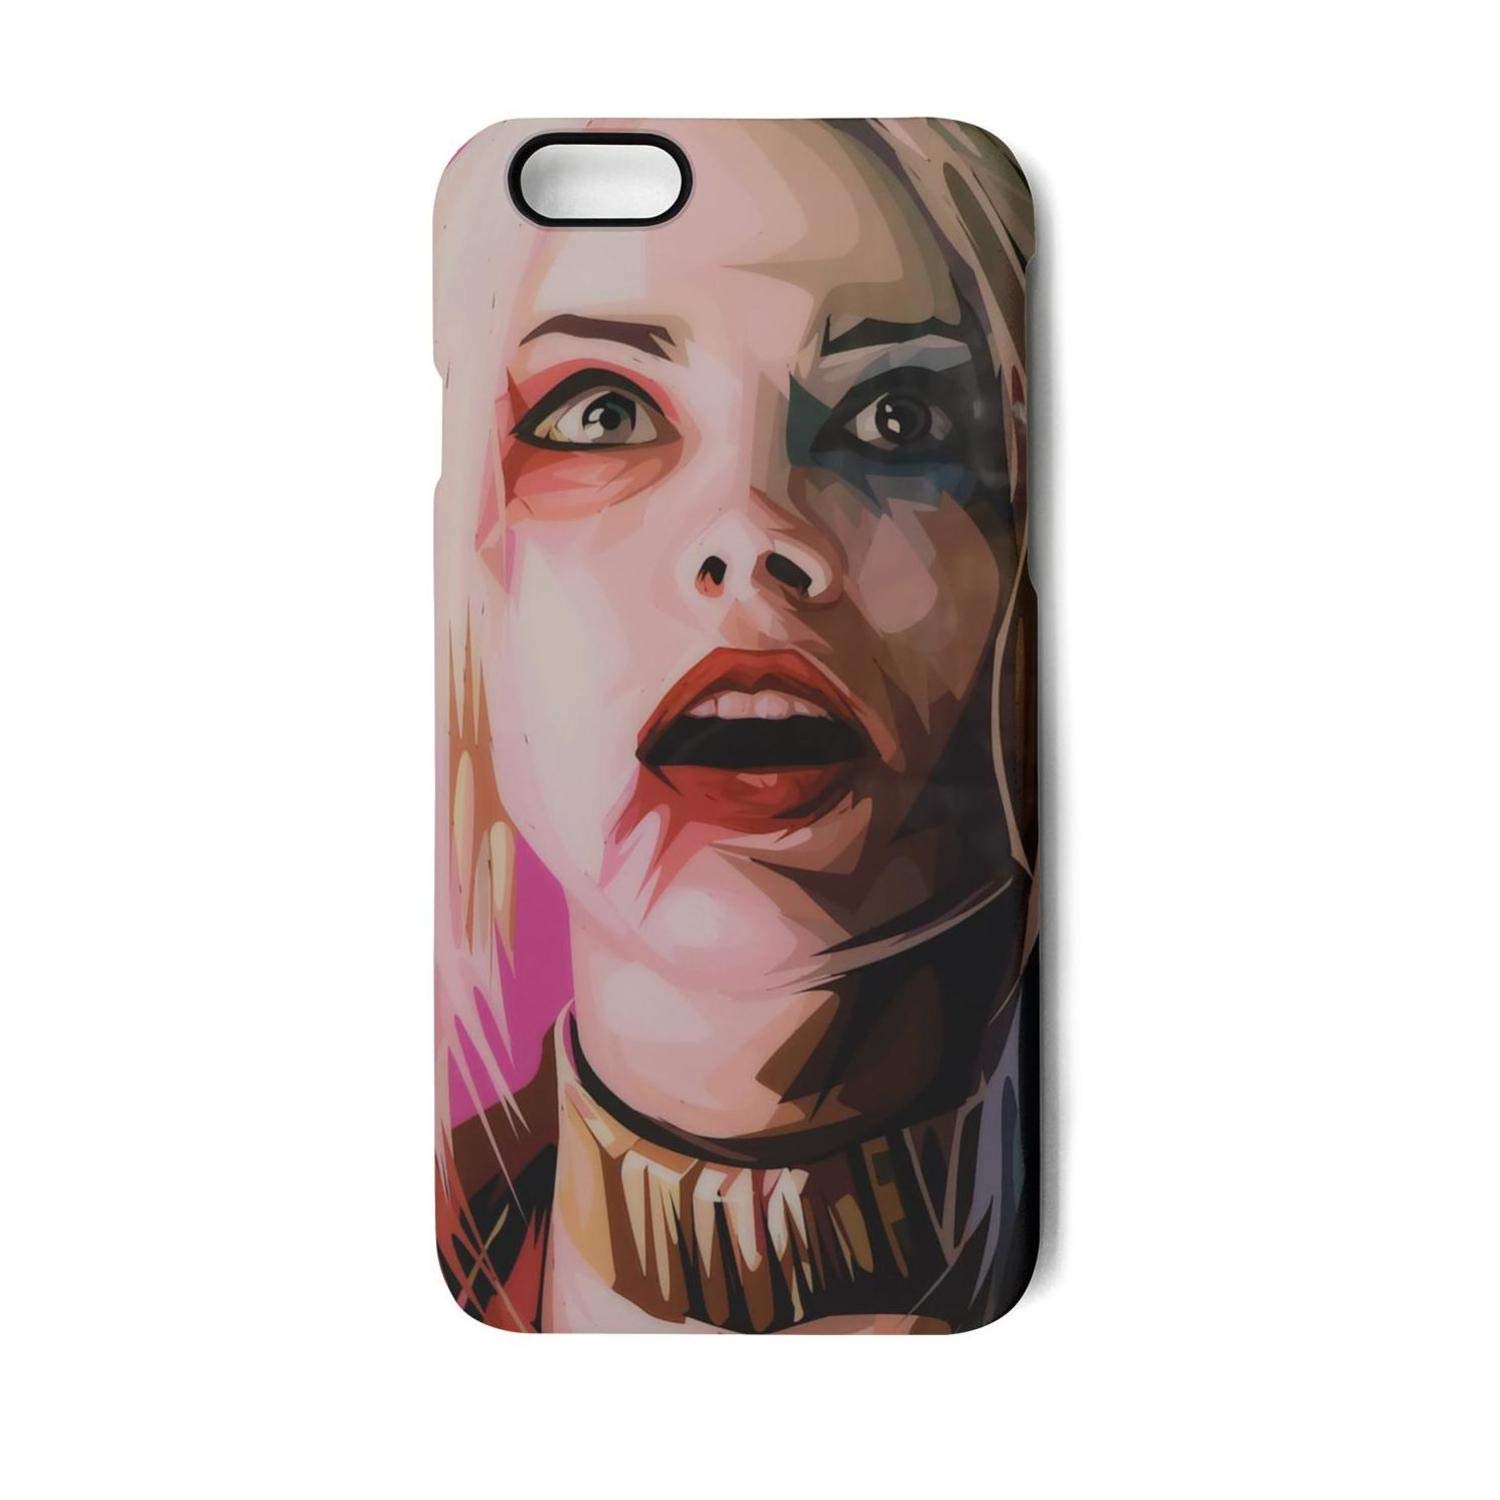 harley quinn wallpaper,face,head,mobile phone case,mouth,fictional character